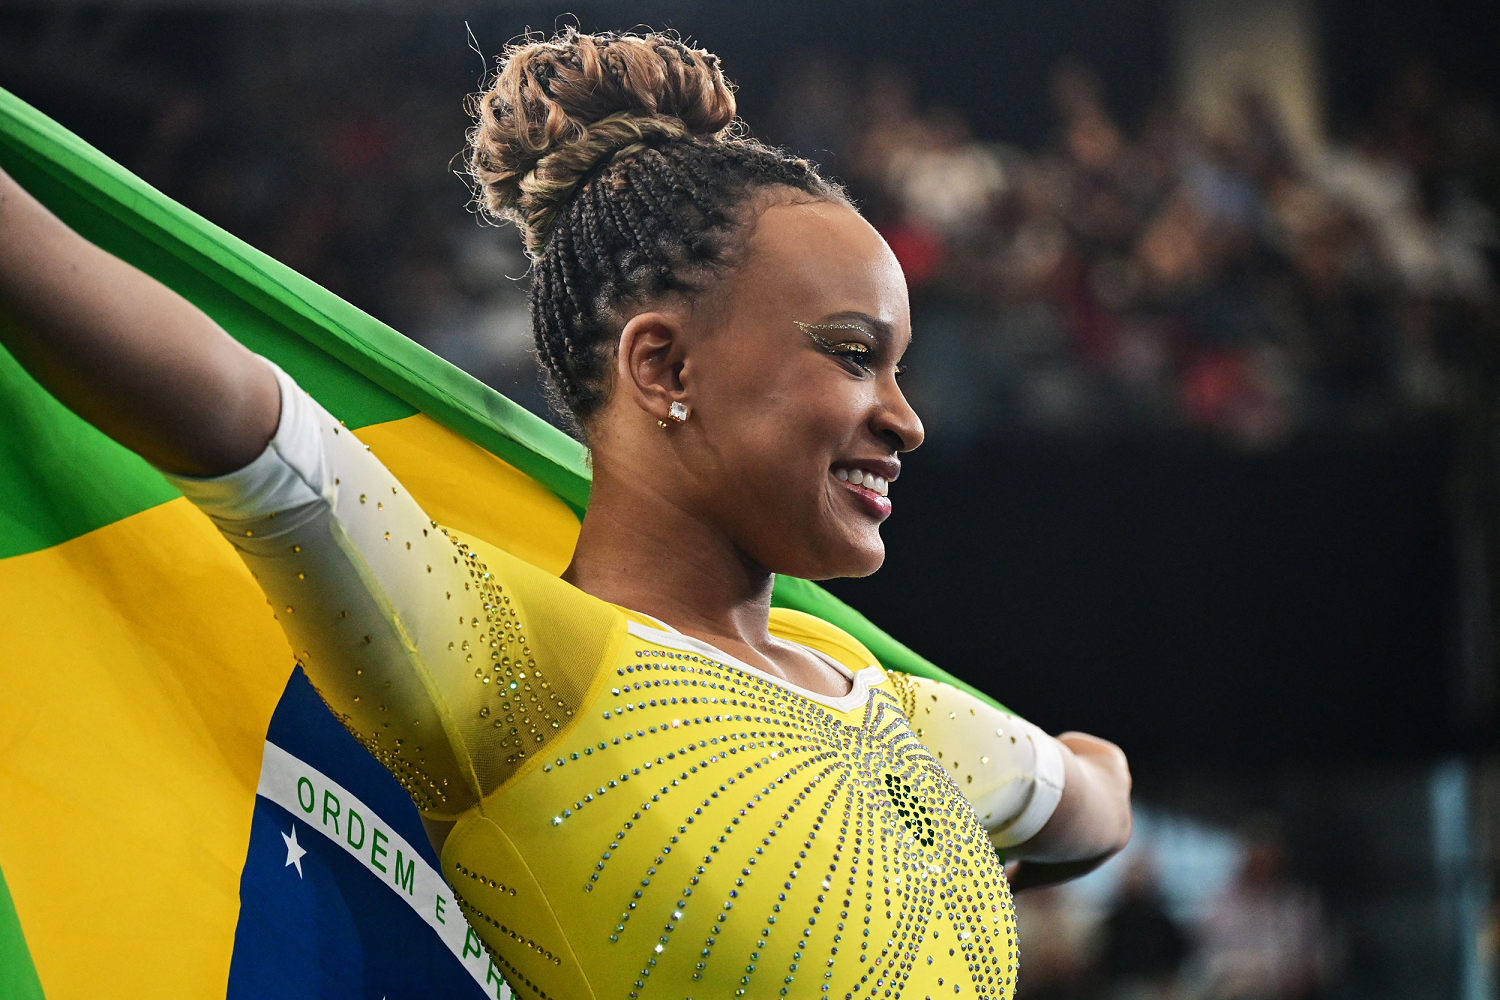 The Brazilian gymnast who could challenge Simone Biles in Paris